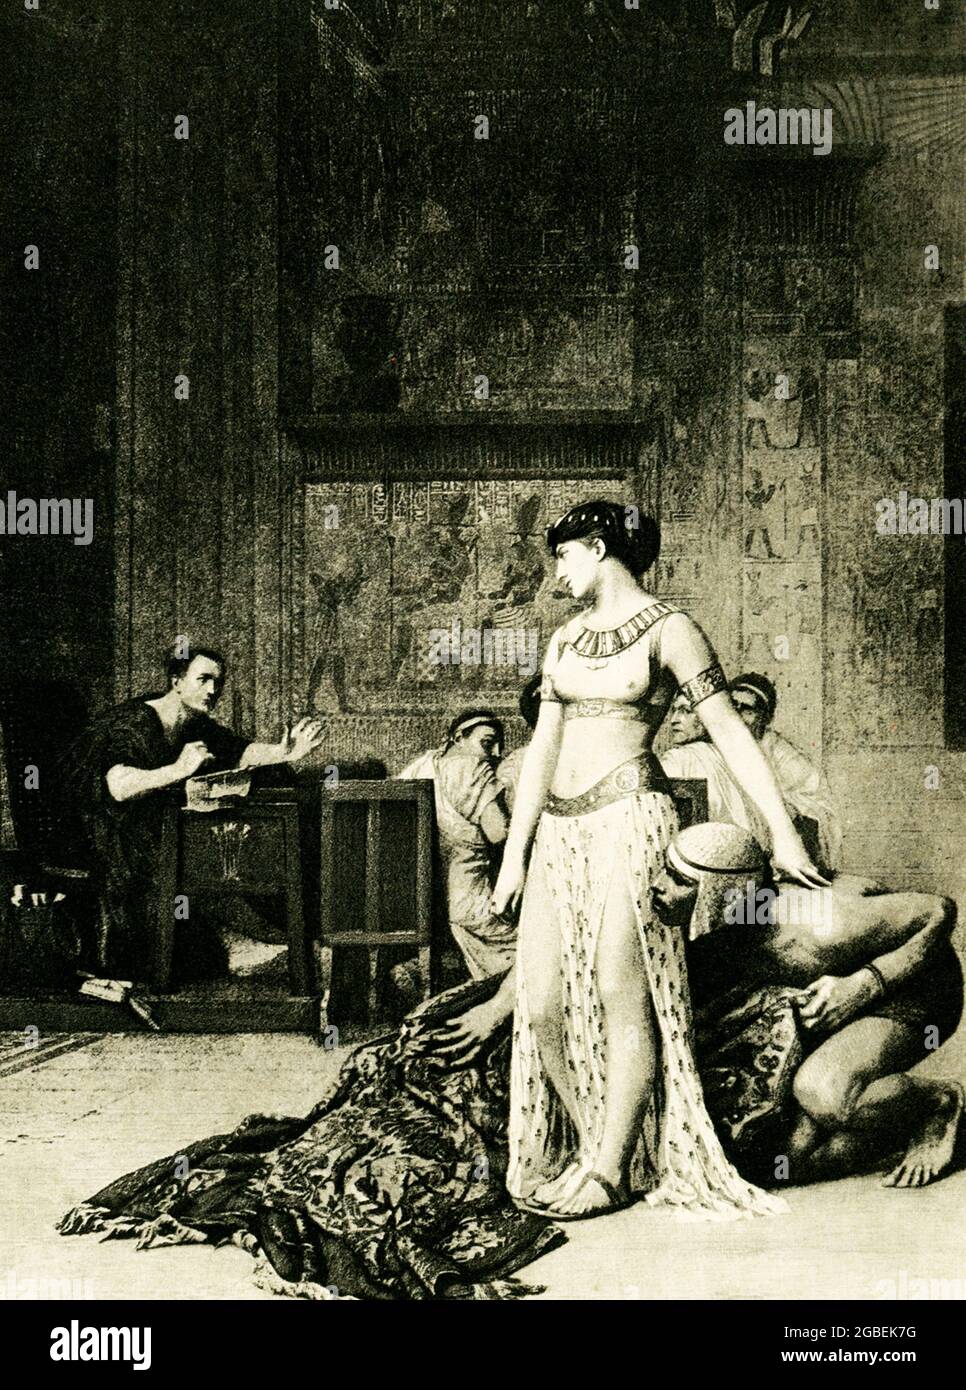 The caption on this 1903 image reads: “Cleopatra before Julius Caesar from painting by Gerome.” It appeared in the book History of Egypt by French Egyptologist Gaston Maspero. Aware that Caesar's diplomatic intervention could help her regain the throne. The year was about 48 B.C. From her brother Ptolemy XIII, Cleopatra hatched a scheme to sneak herself into the palace at Alexandria where Julius Caesar was at the time preparing for a conference to bring the warring siblings to an agreement. She wanted an audience with Caesar. She persuaded her servant Apollodoros to wrap her in a carpet (or, a Stock Photo